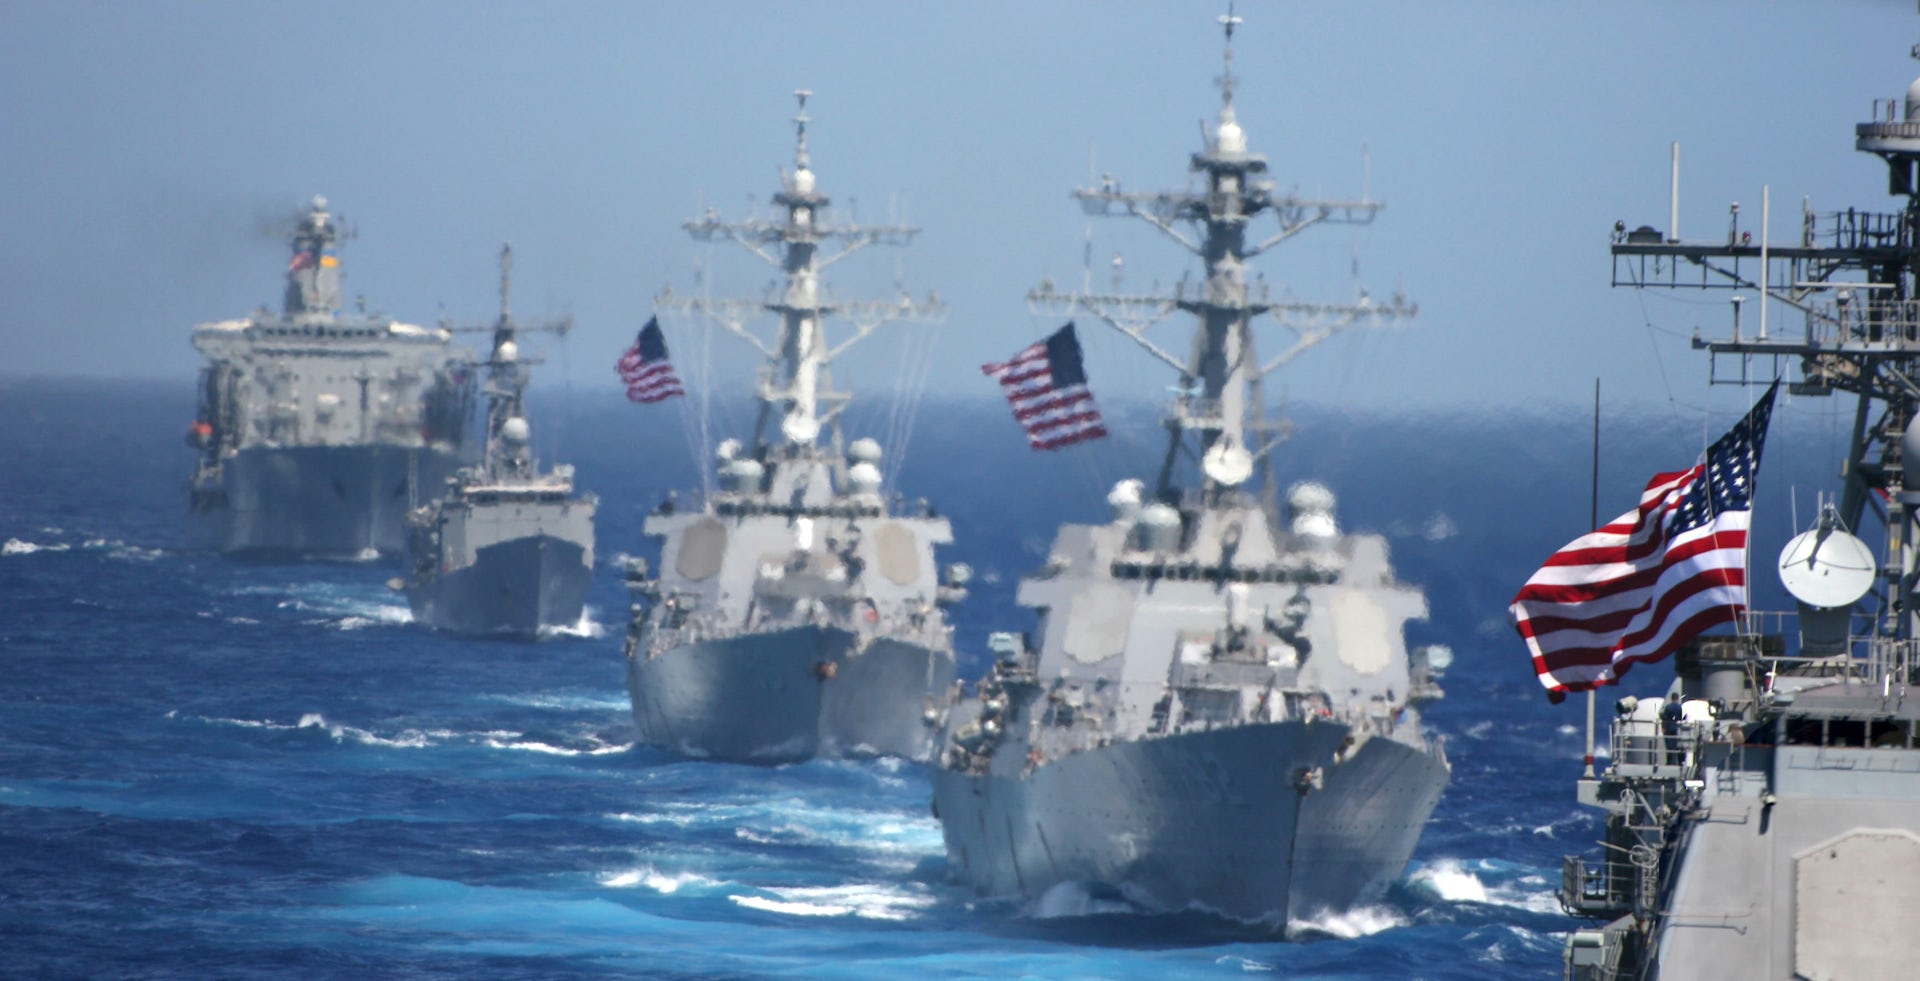 A Navy Scandal Sheds Light on the Nature of Bribery and the Limits of Free Speech